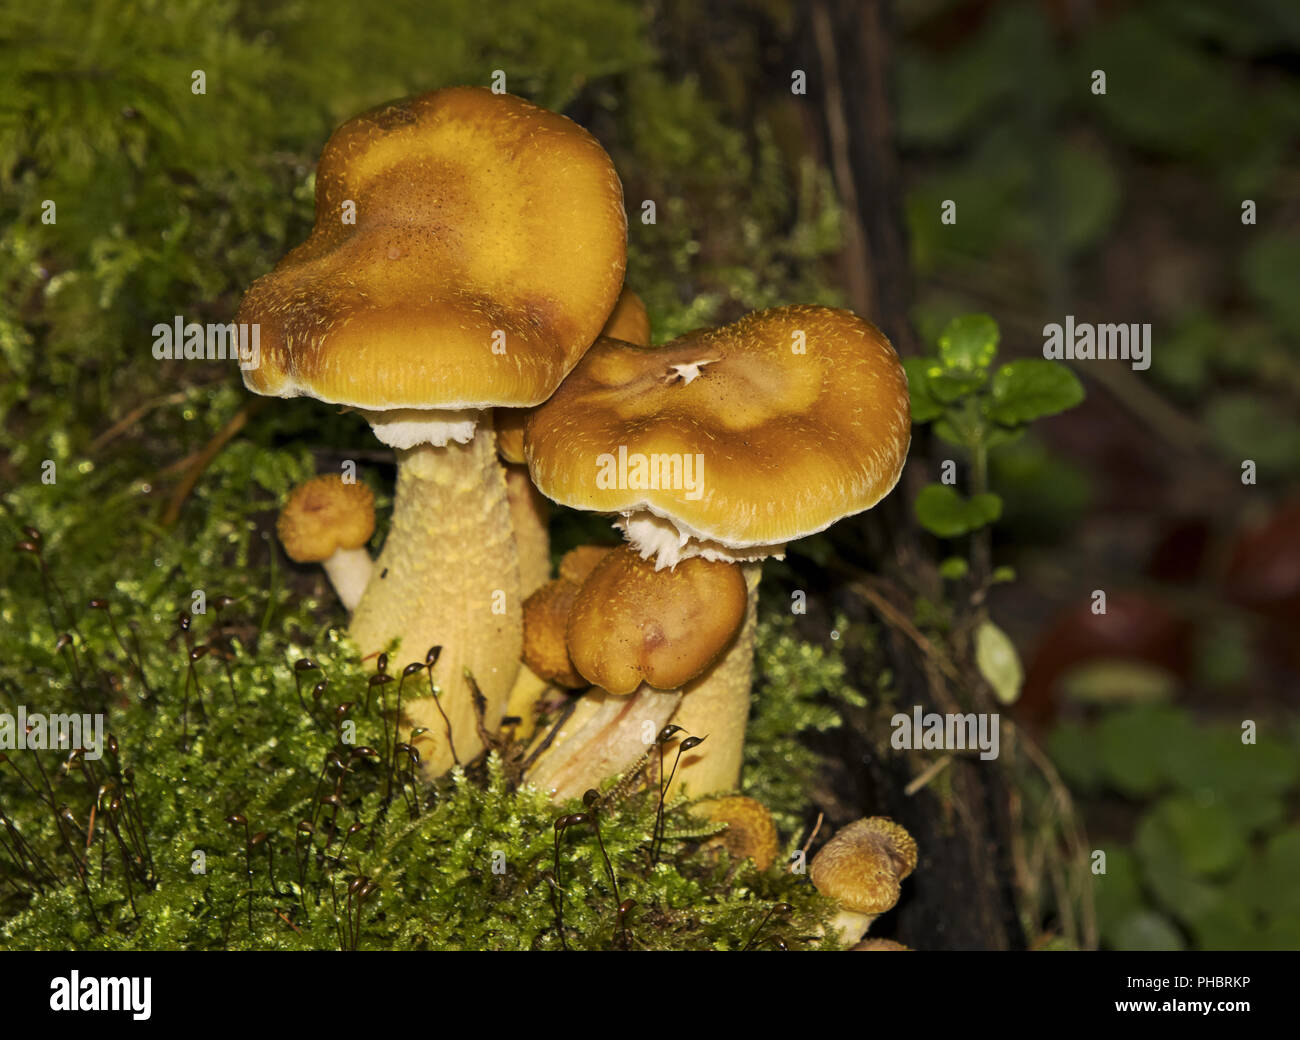 Mushrooms on rotting wood in the forest Stock Photo